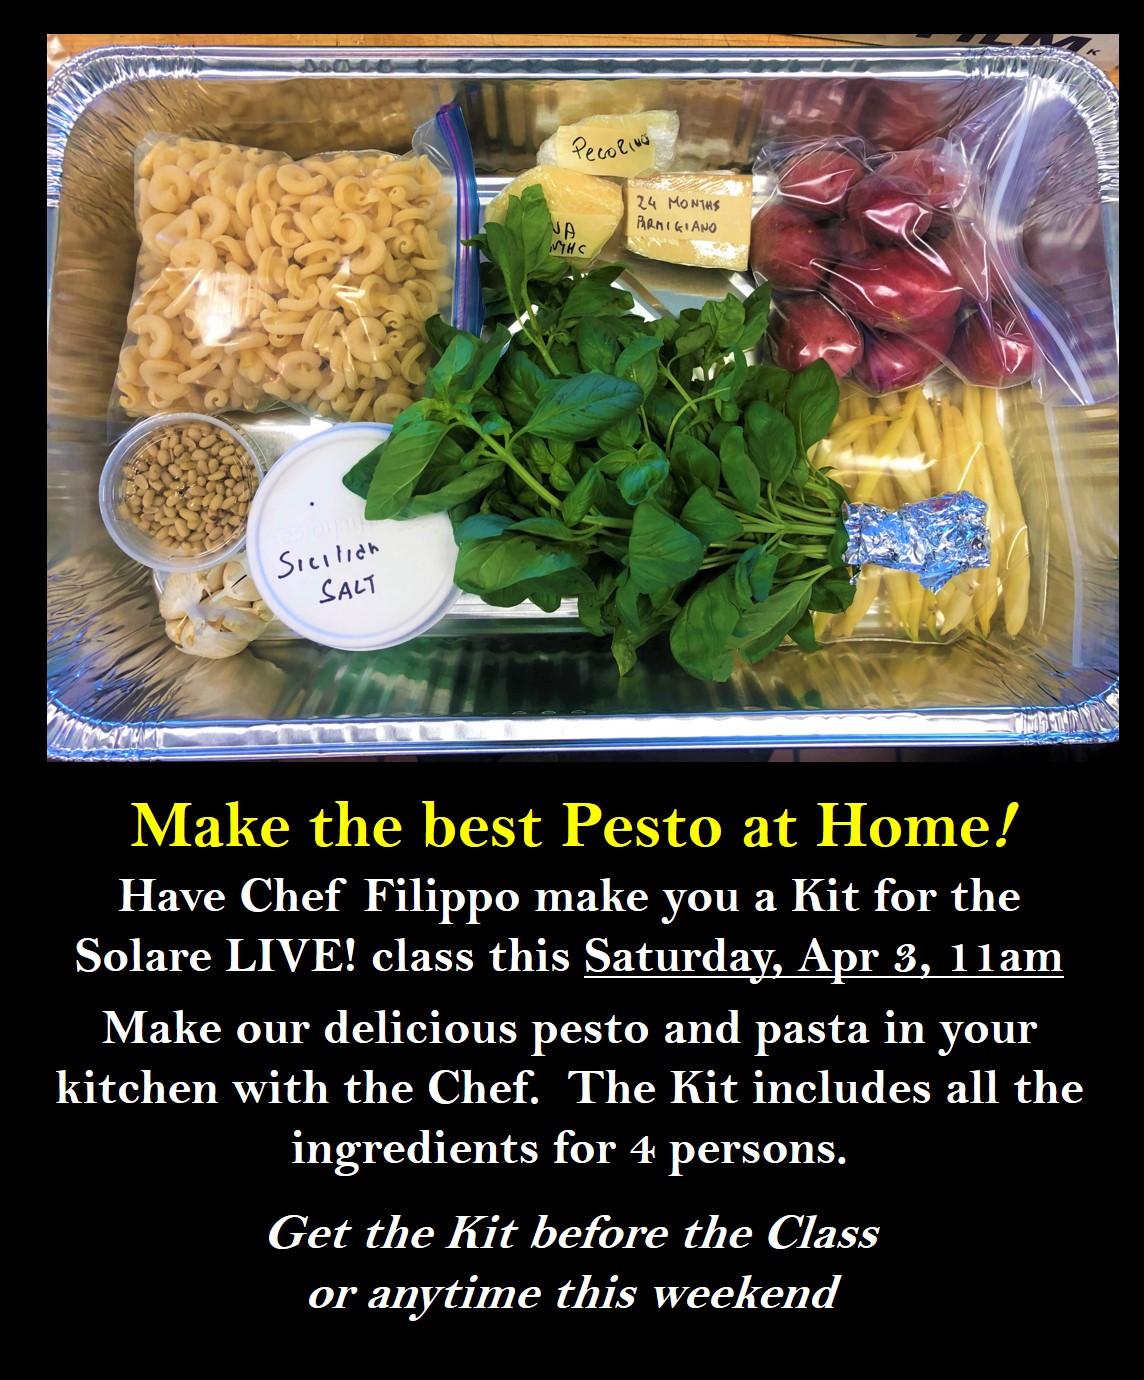 <a id="Solare-LIVE-Cooking-Class-Apr-3"></a>Solare LIVE! Cooking Class - Pesto